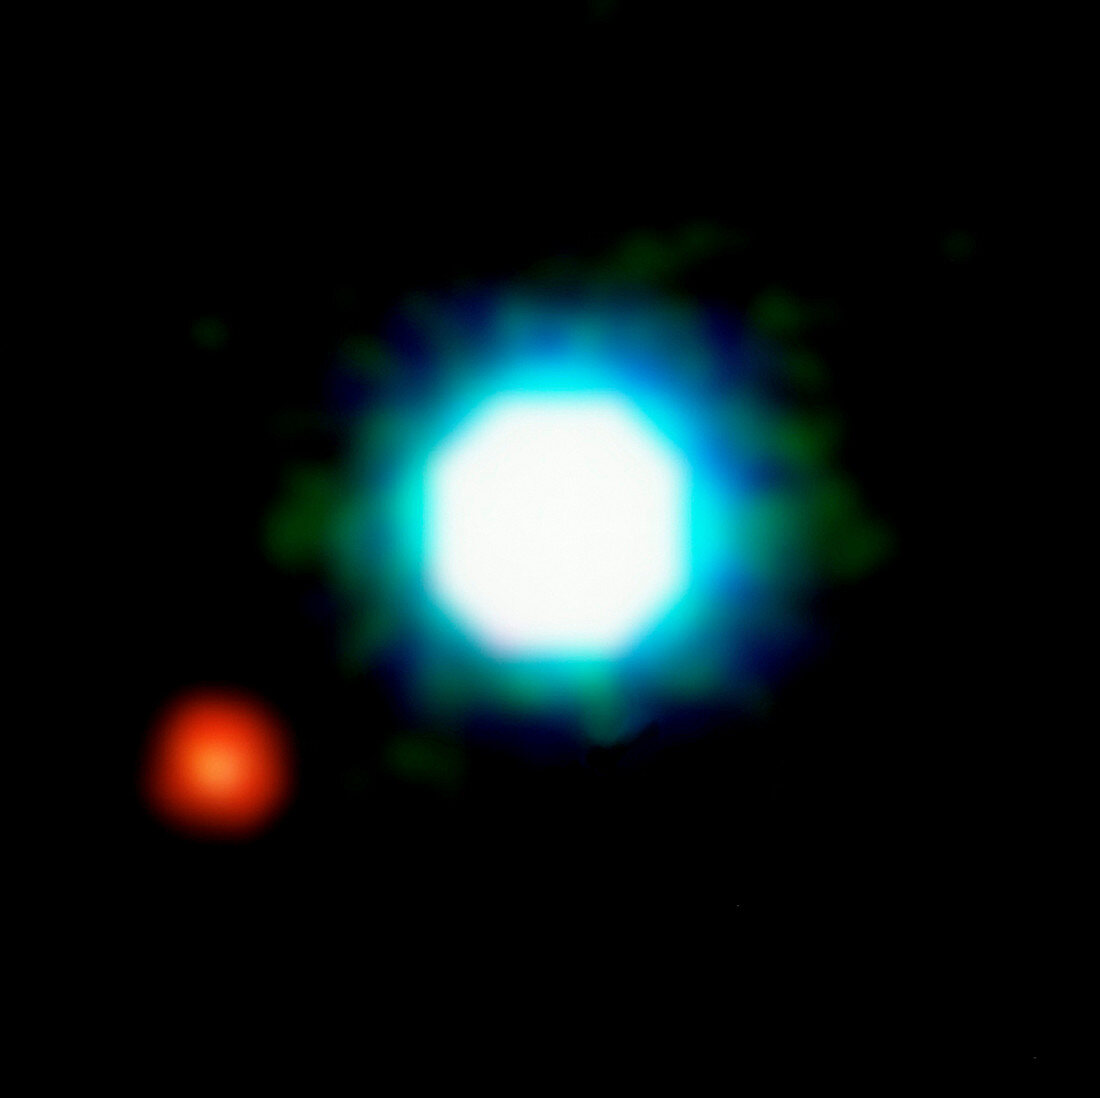 Possible first exoplanet image